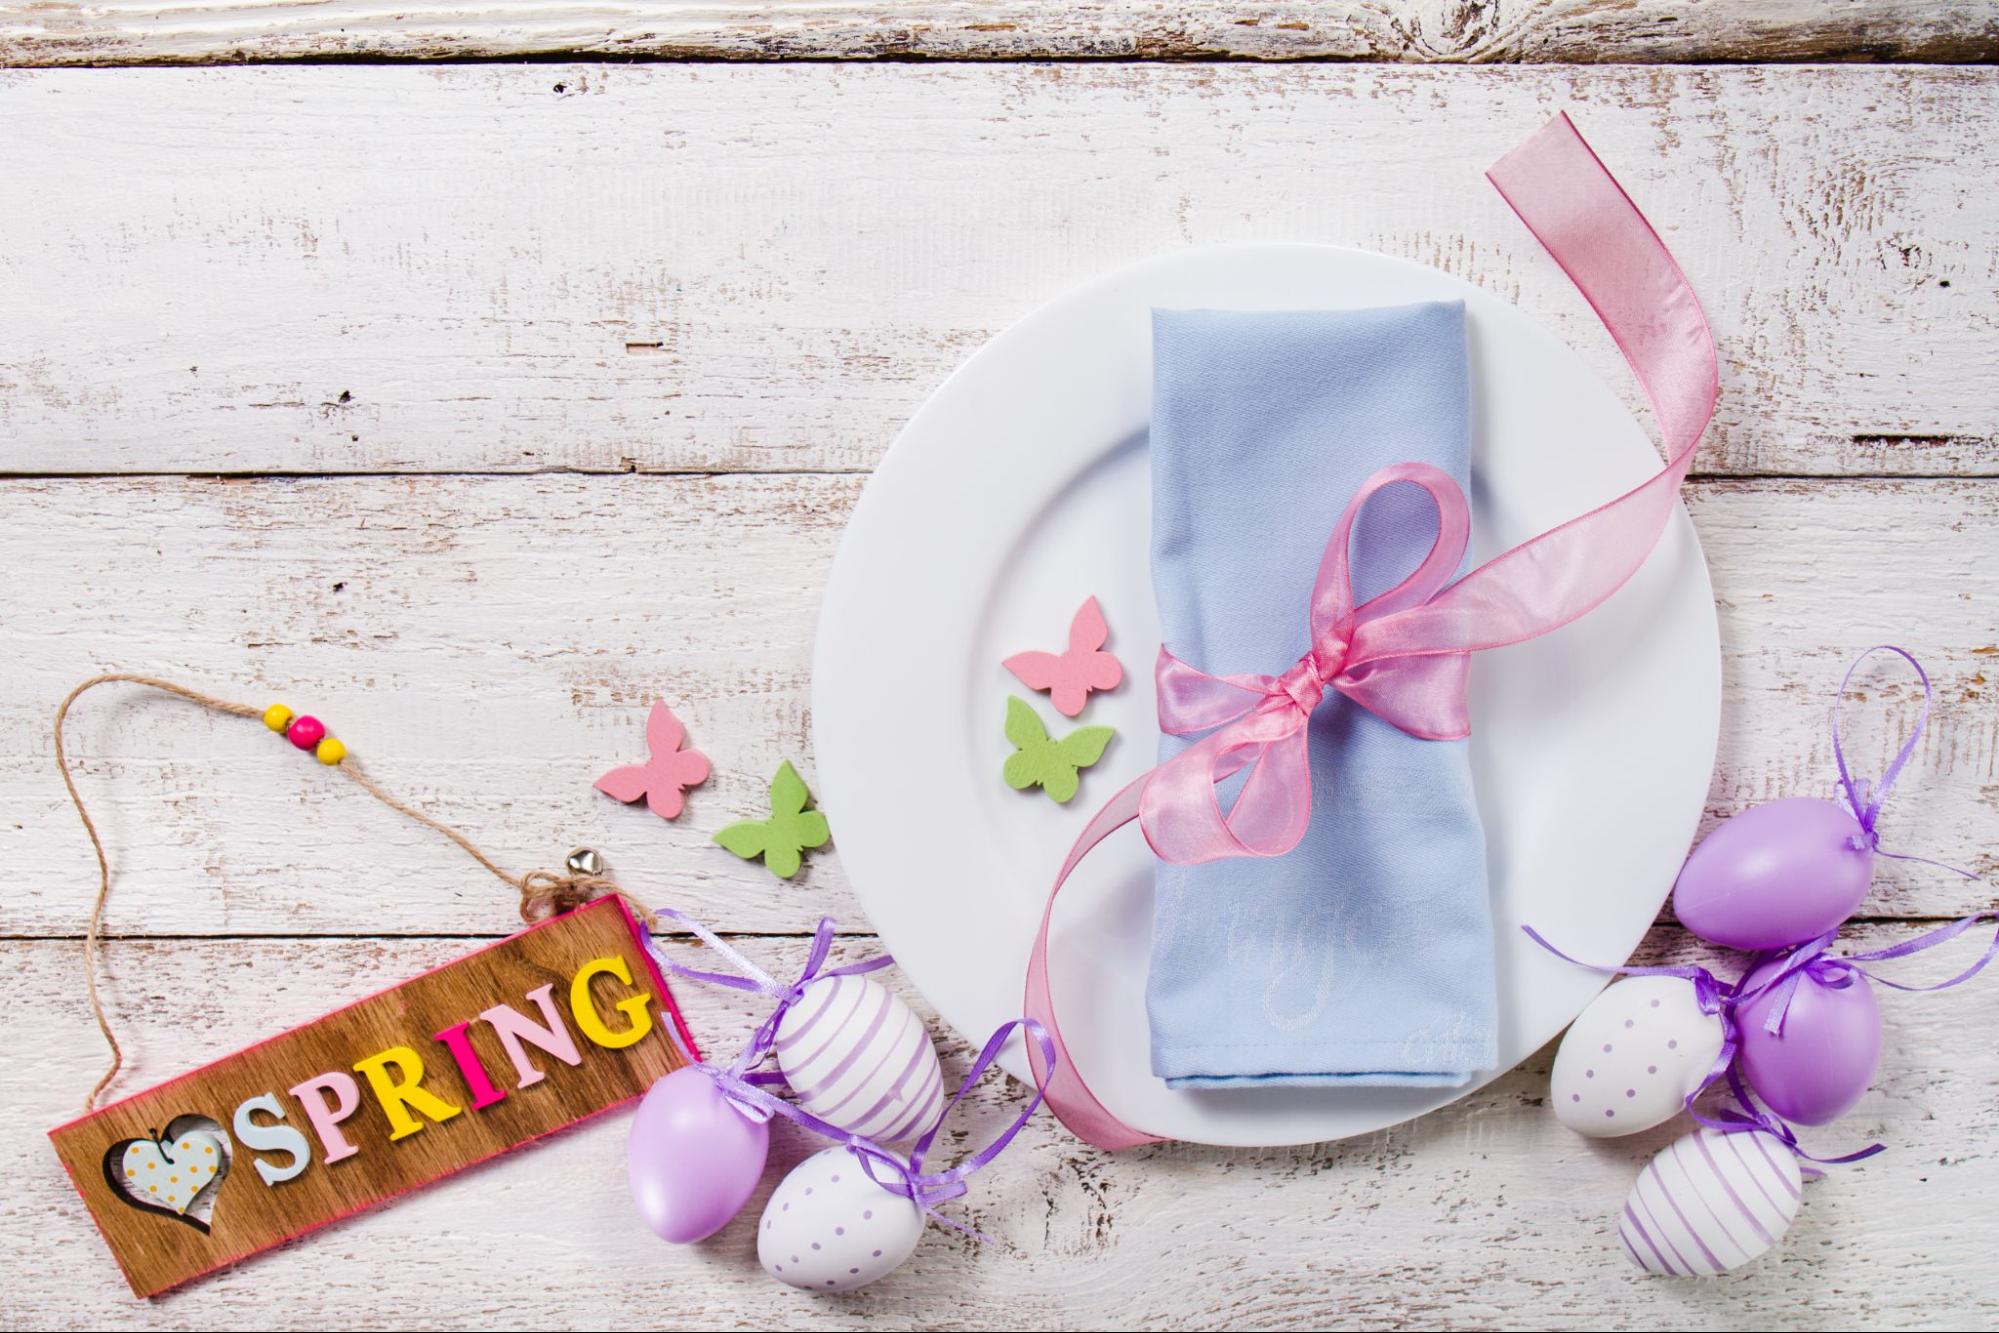 -Spring-themed table setting with burp cloth, ideal for baby shower gift ideas